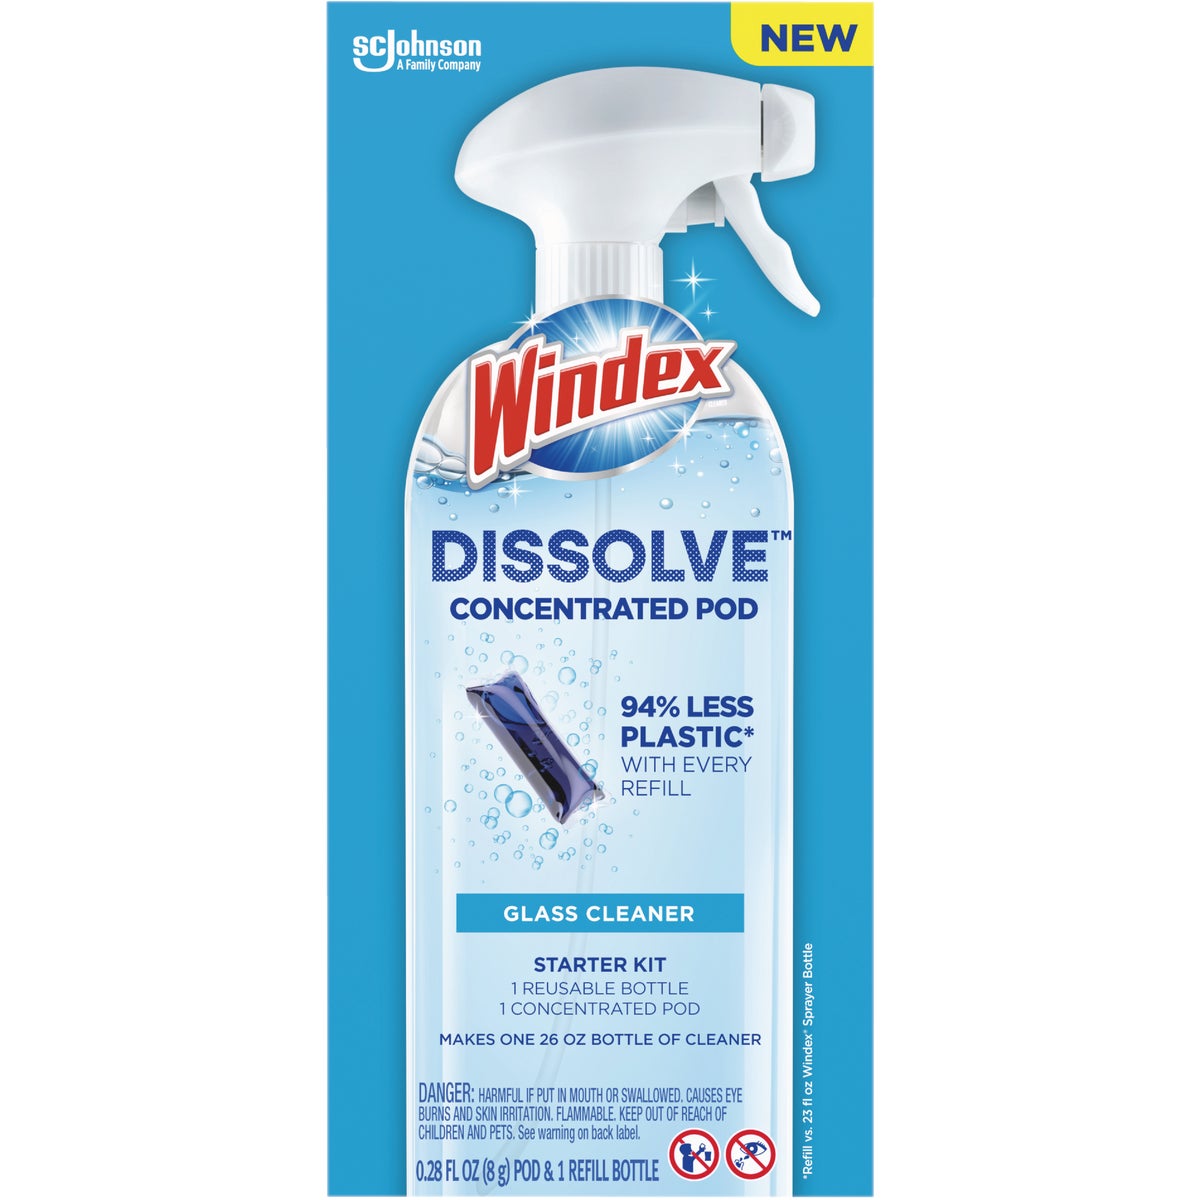 Windex Dissolve Glass Cleaner Concentrated Pod Starter Kit